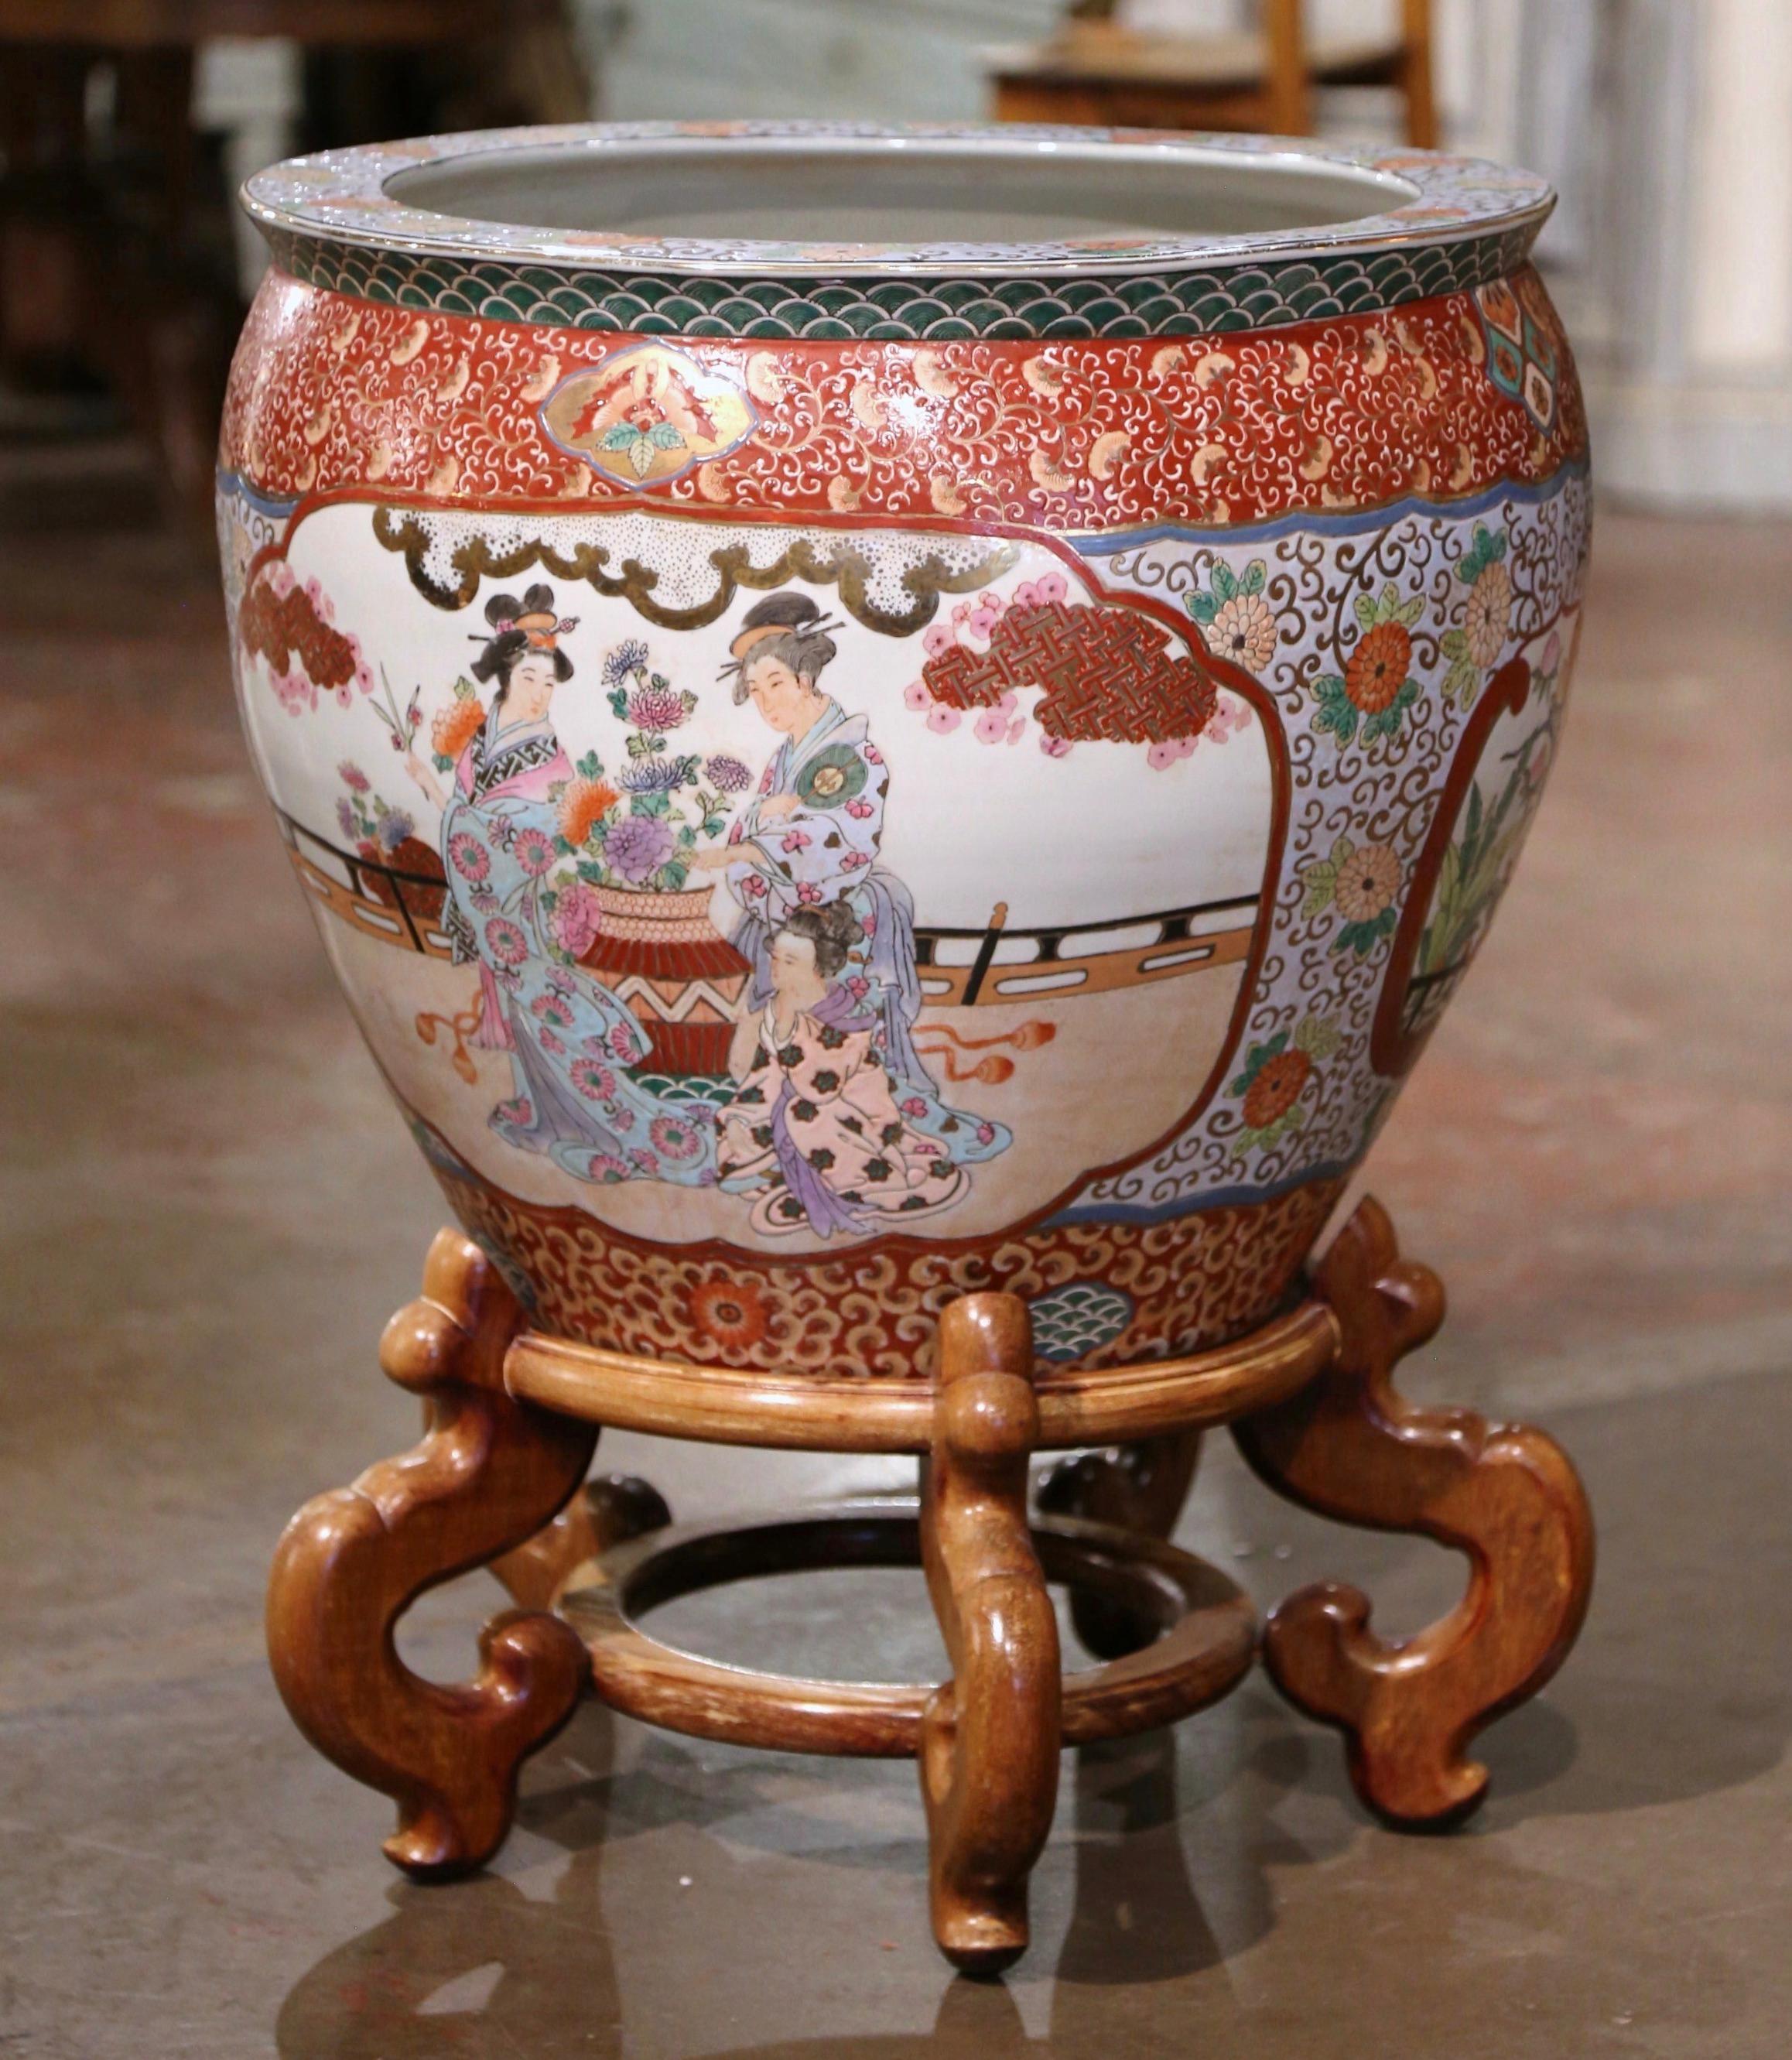 This massive and colorful vintage fishbowl was created in China, circa 1970. Round in shape and standing on a carved fruitwood base, this elegant exotic porcelain planter features two large hand painted medallions with Chinese figural motifs and